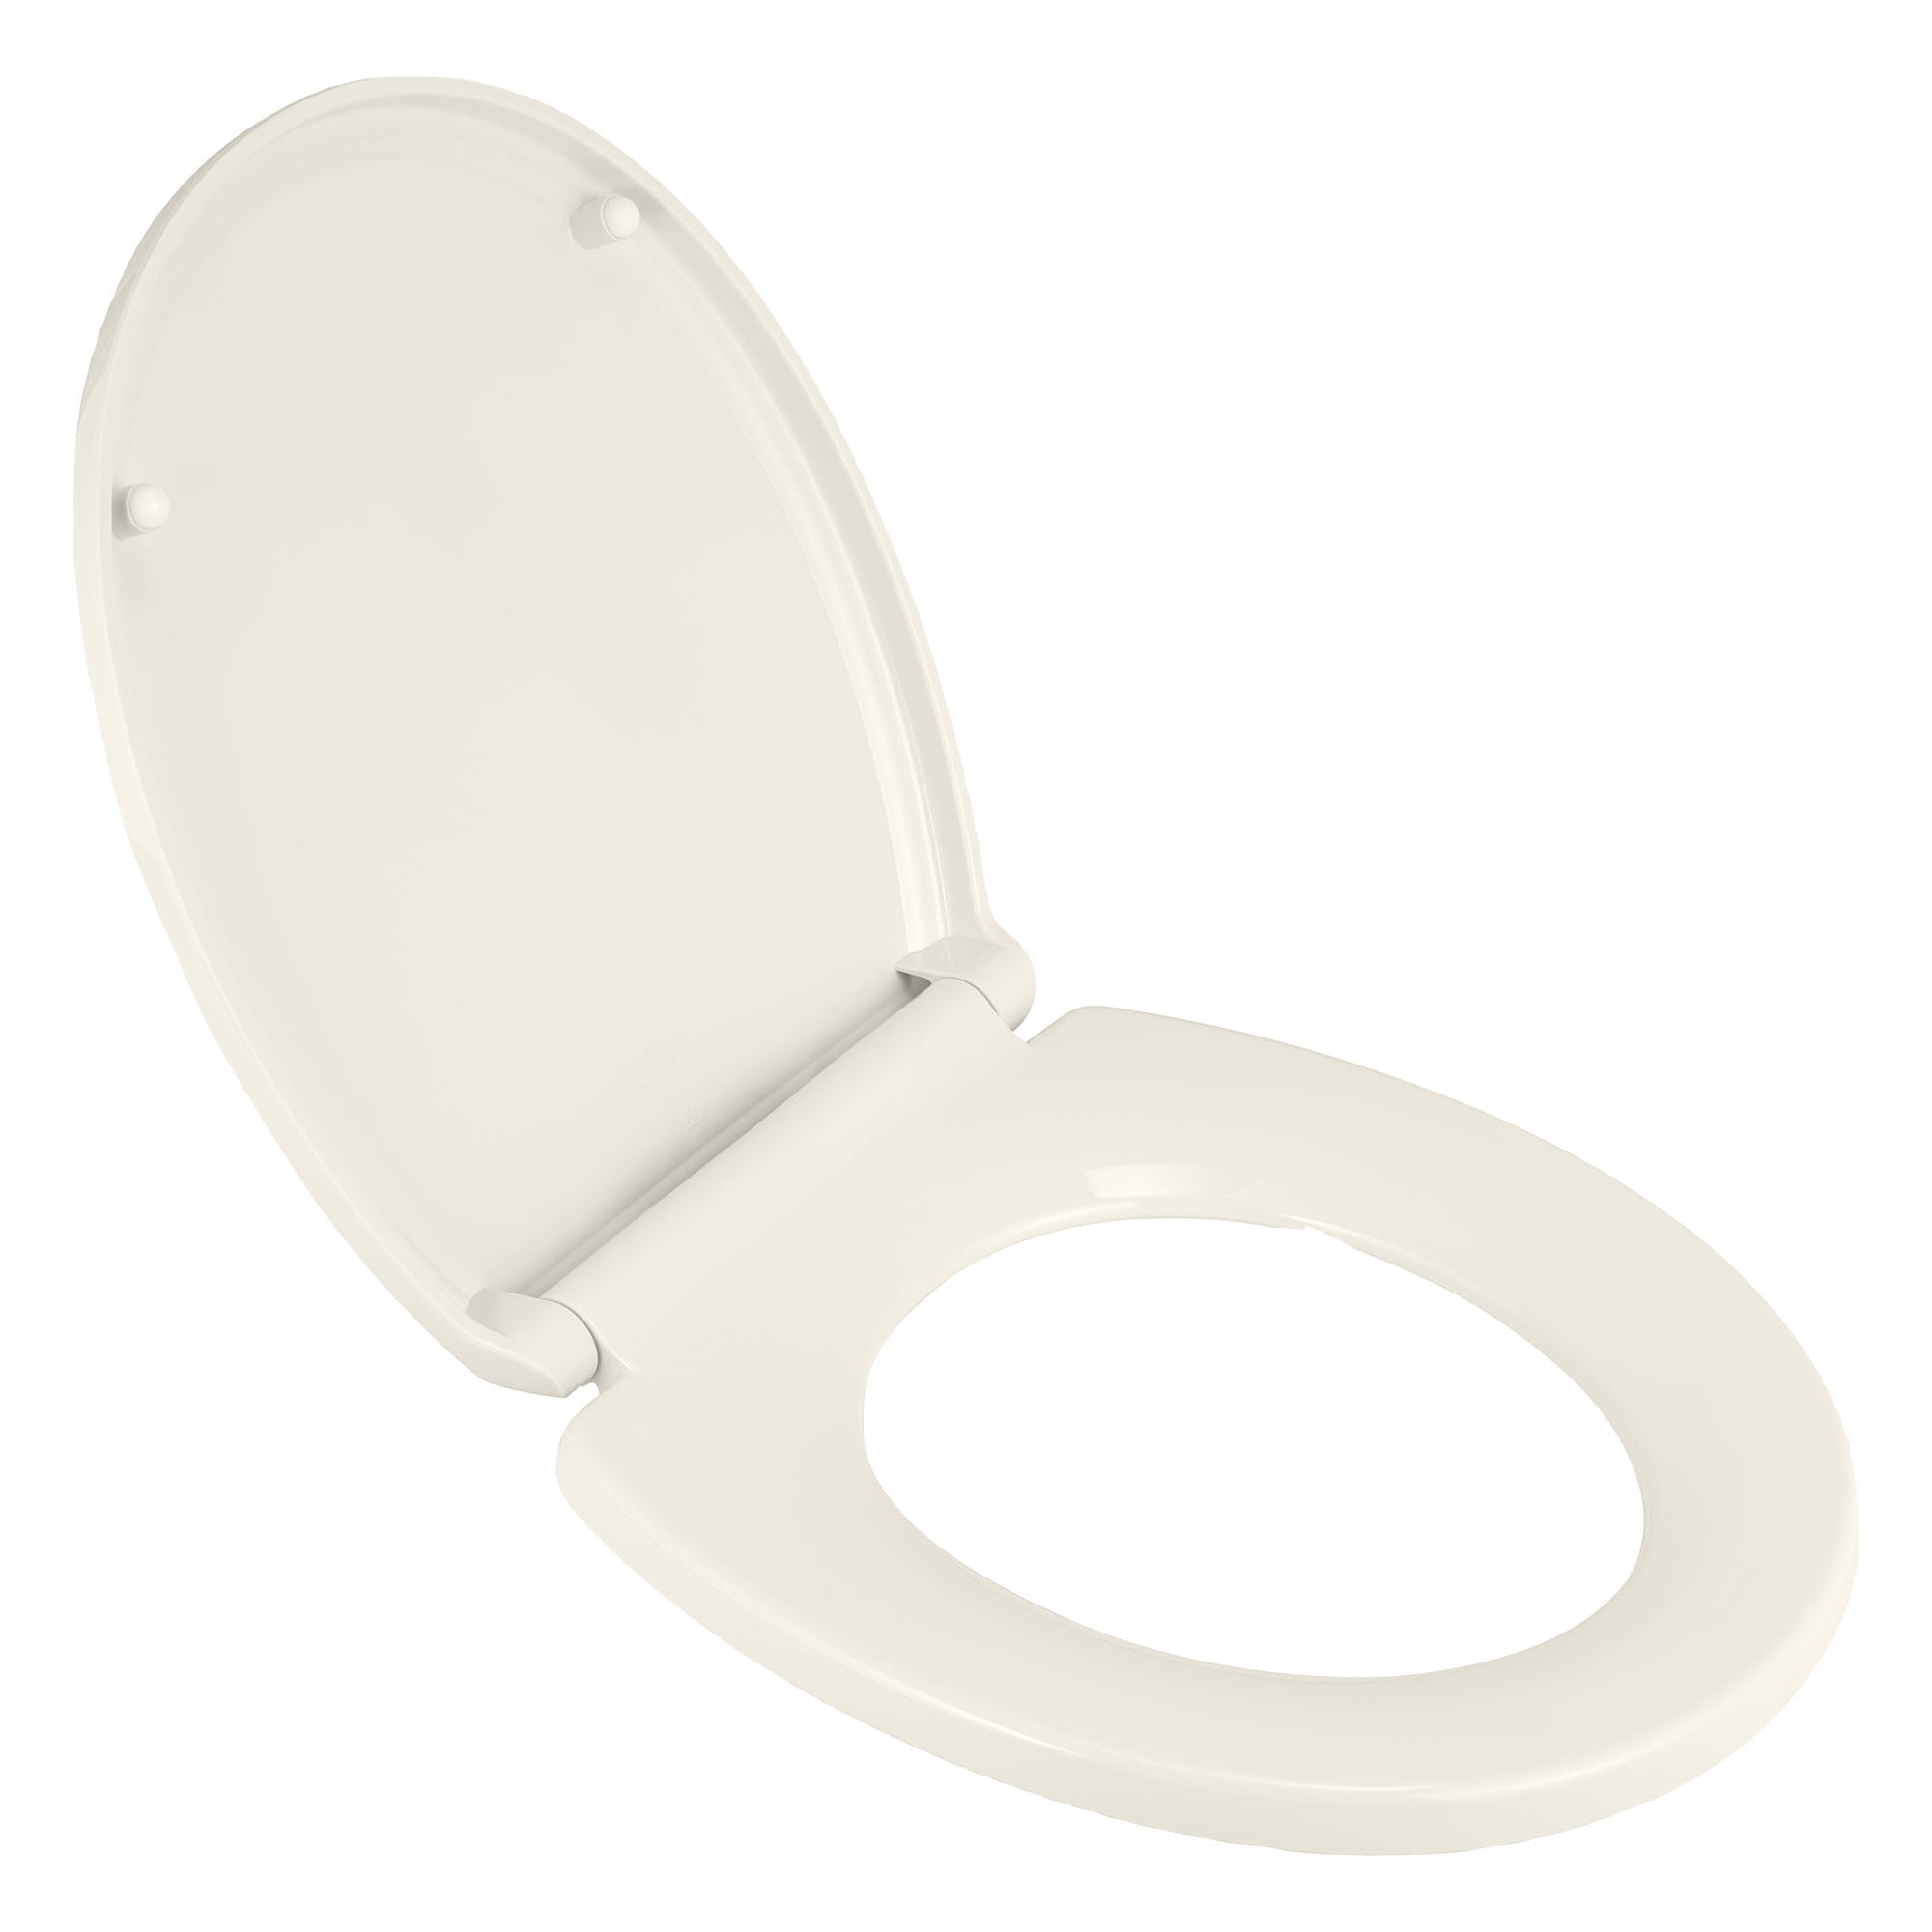 Traditional Slow-Close & Easy Lift-Off Round Front Toilet Seat